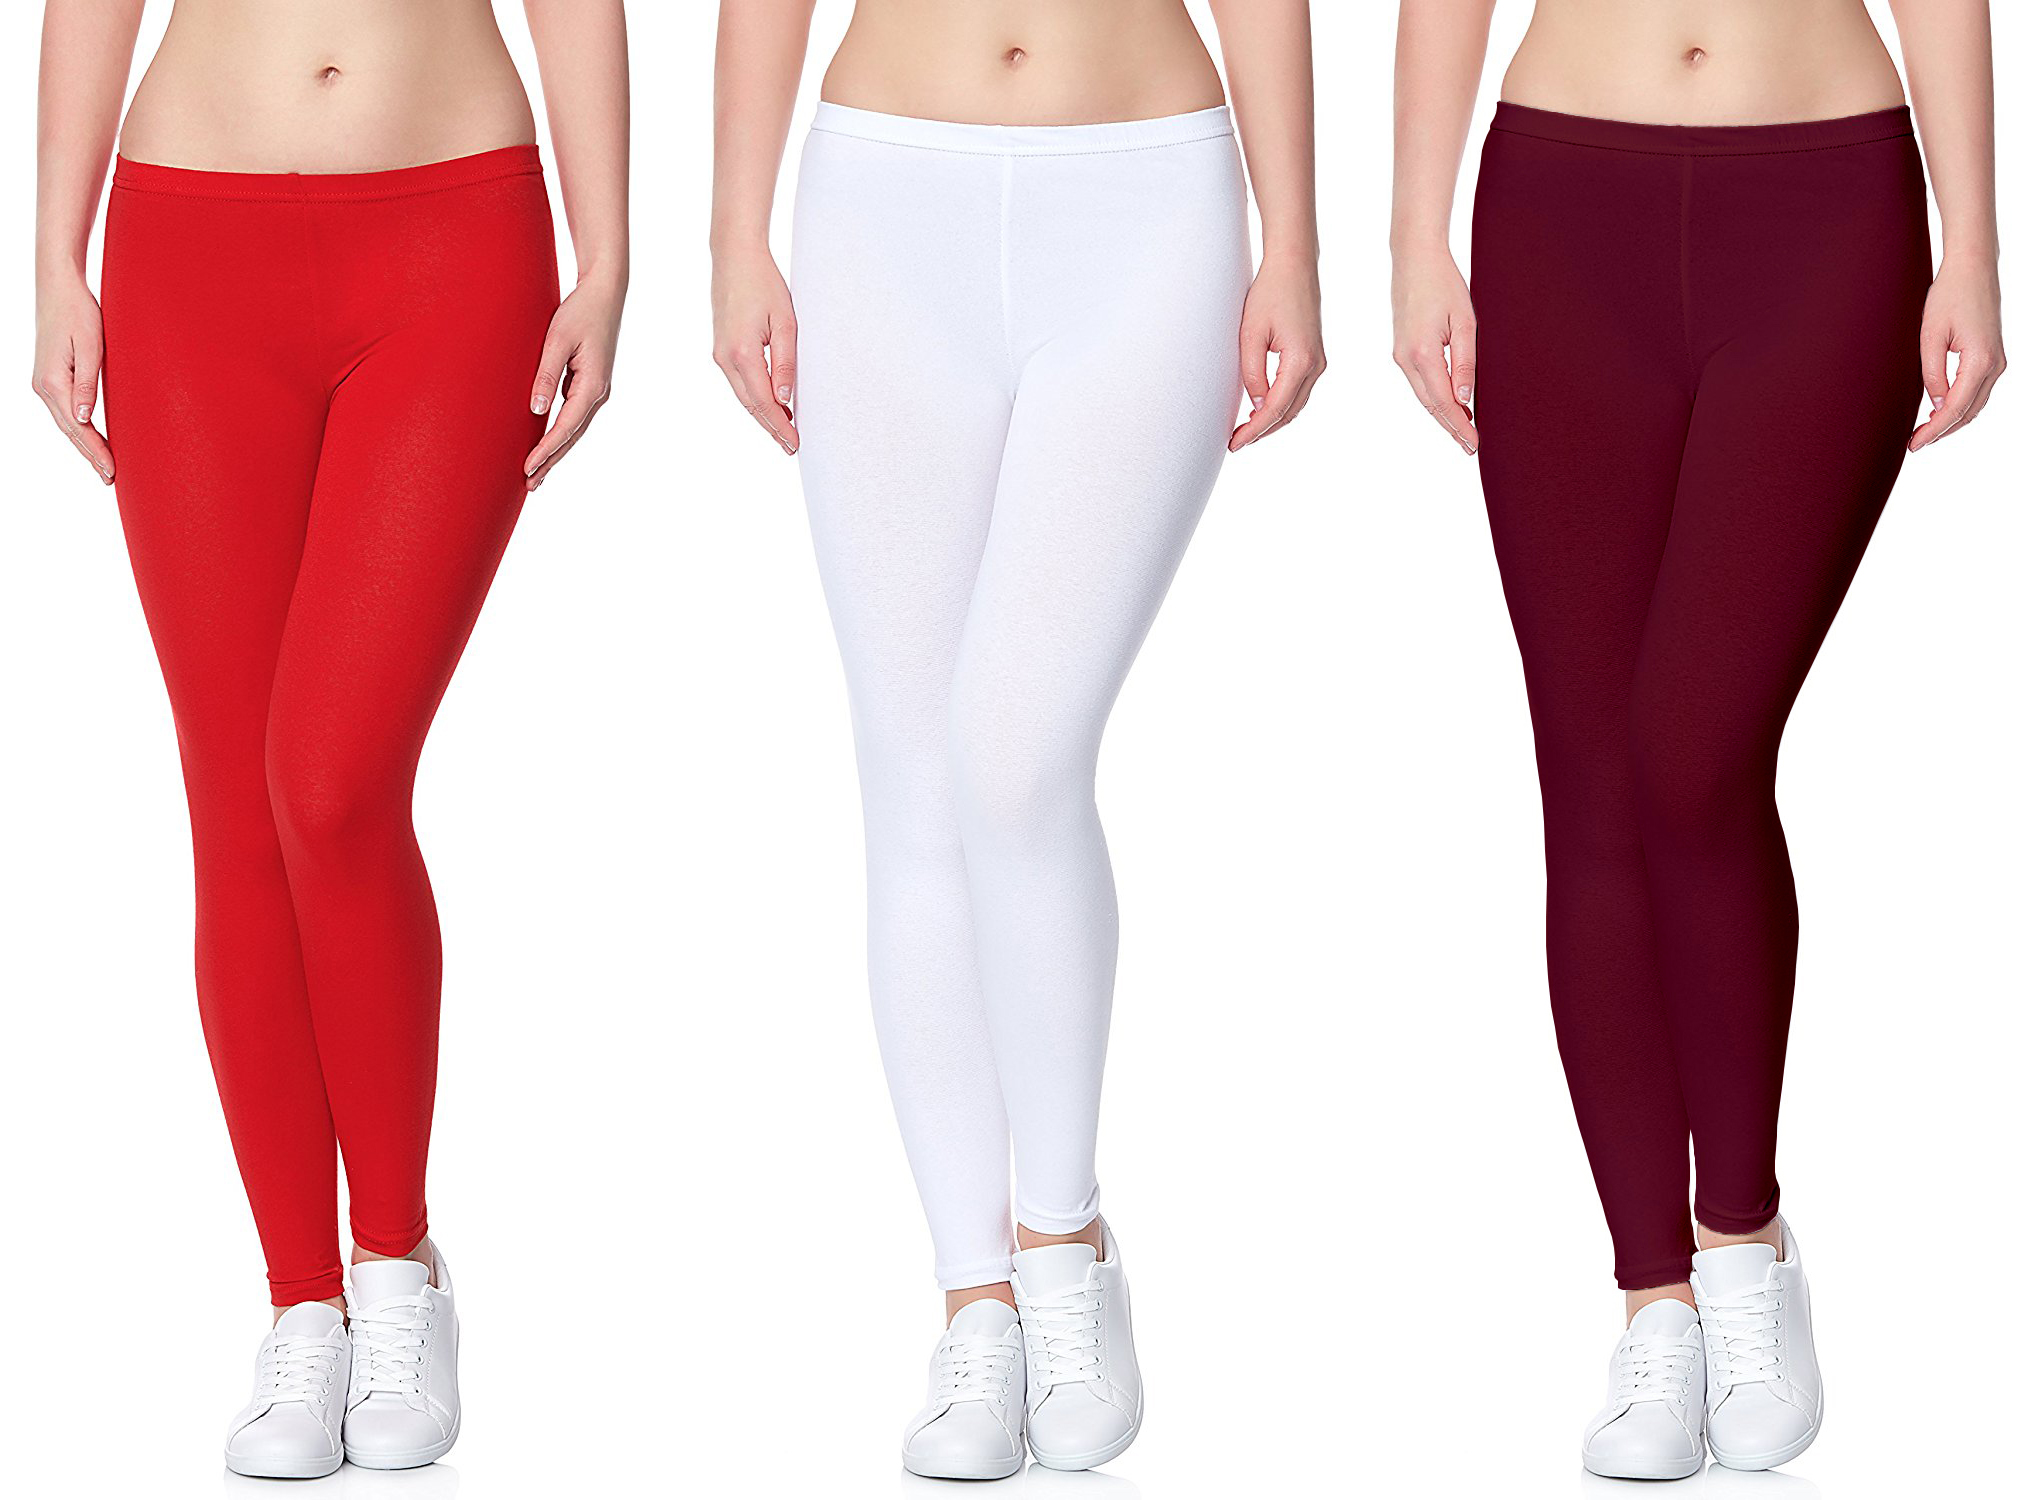 Is It Good To Wear Leggings With A Short Shirtwaist